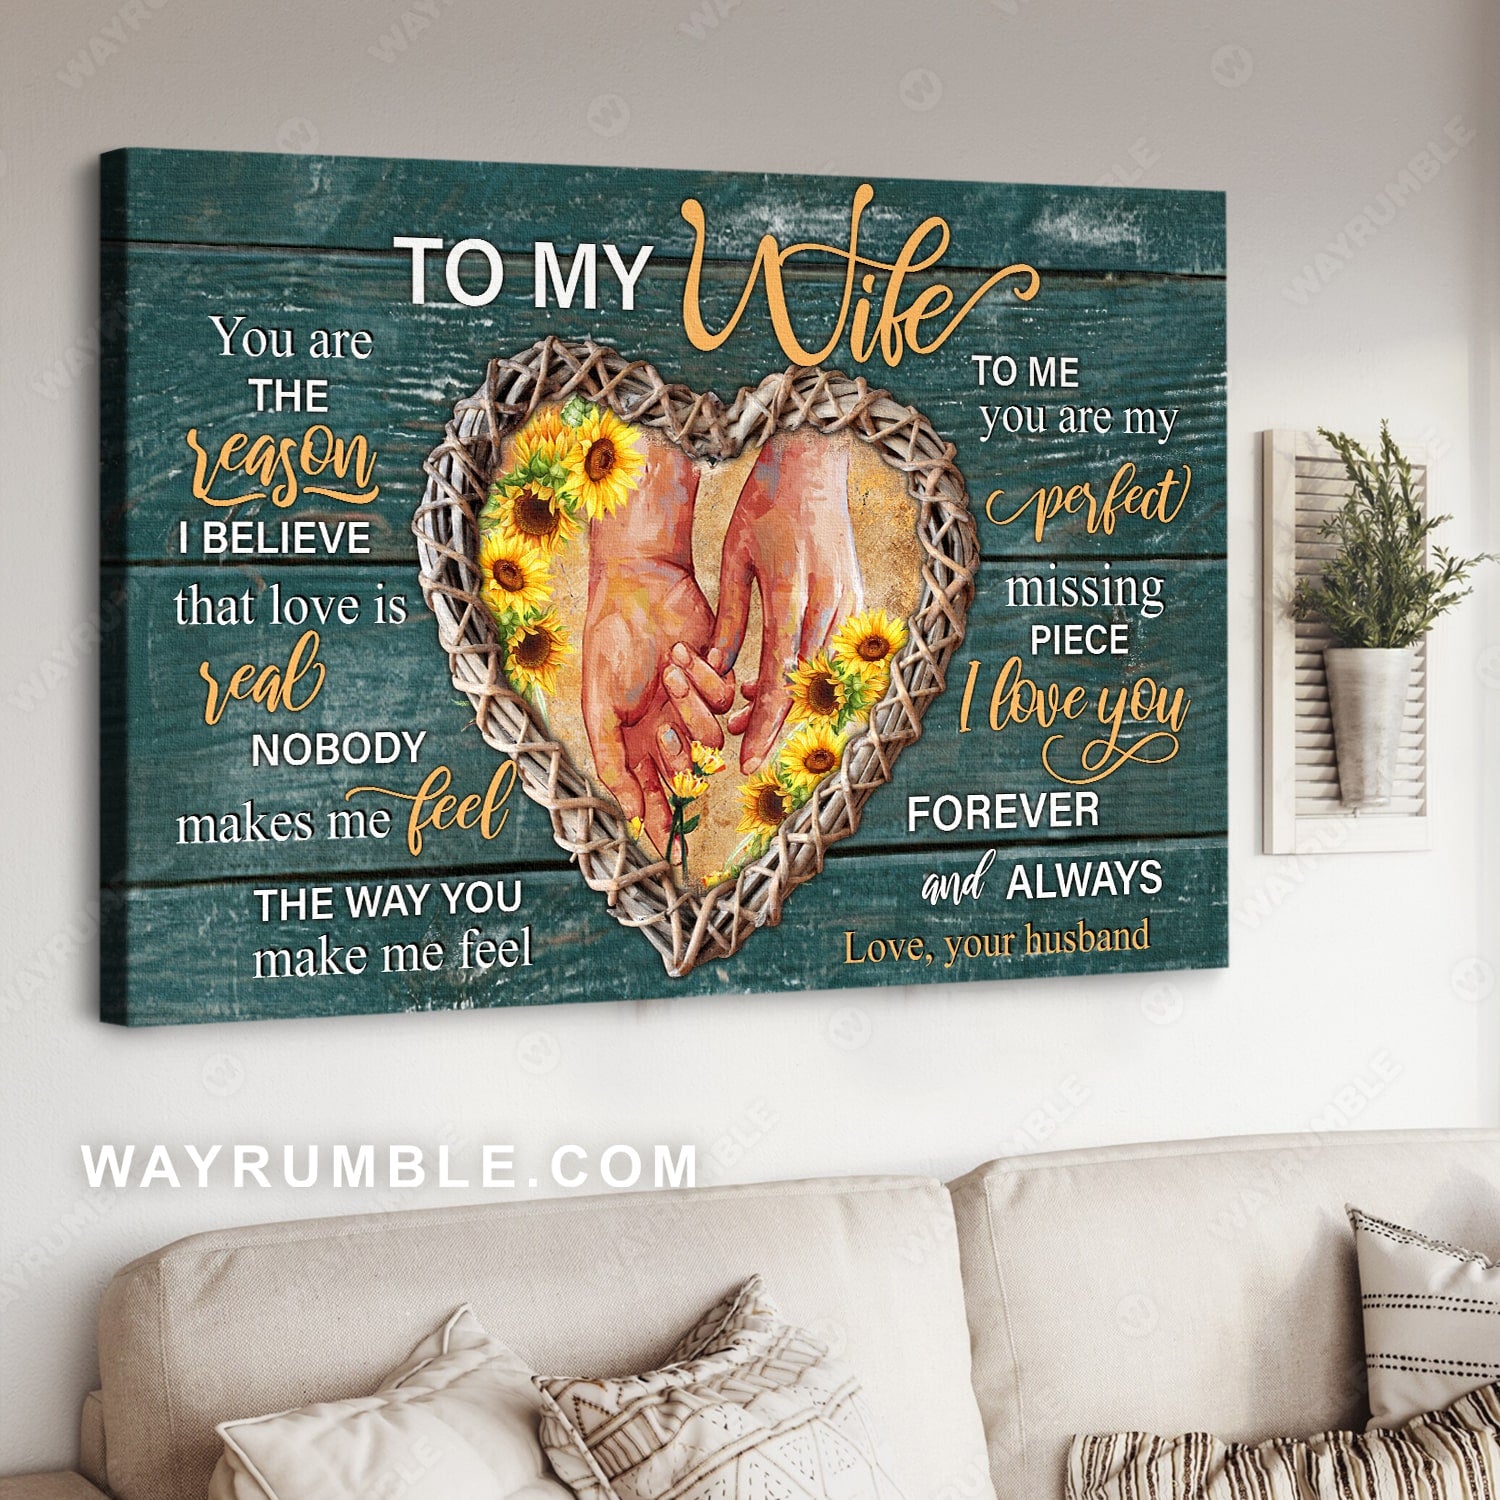 To my wife, Heart shape, Holding hands, Sunflower, You are the reason I believe that love is real - Couple Landscape Canvas Prints, Wall Art